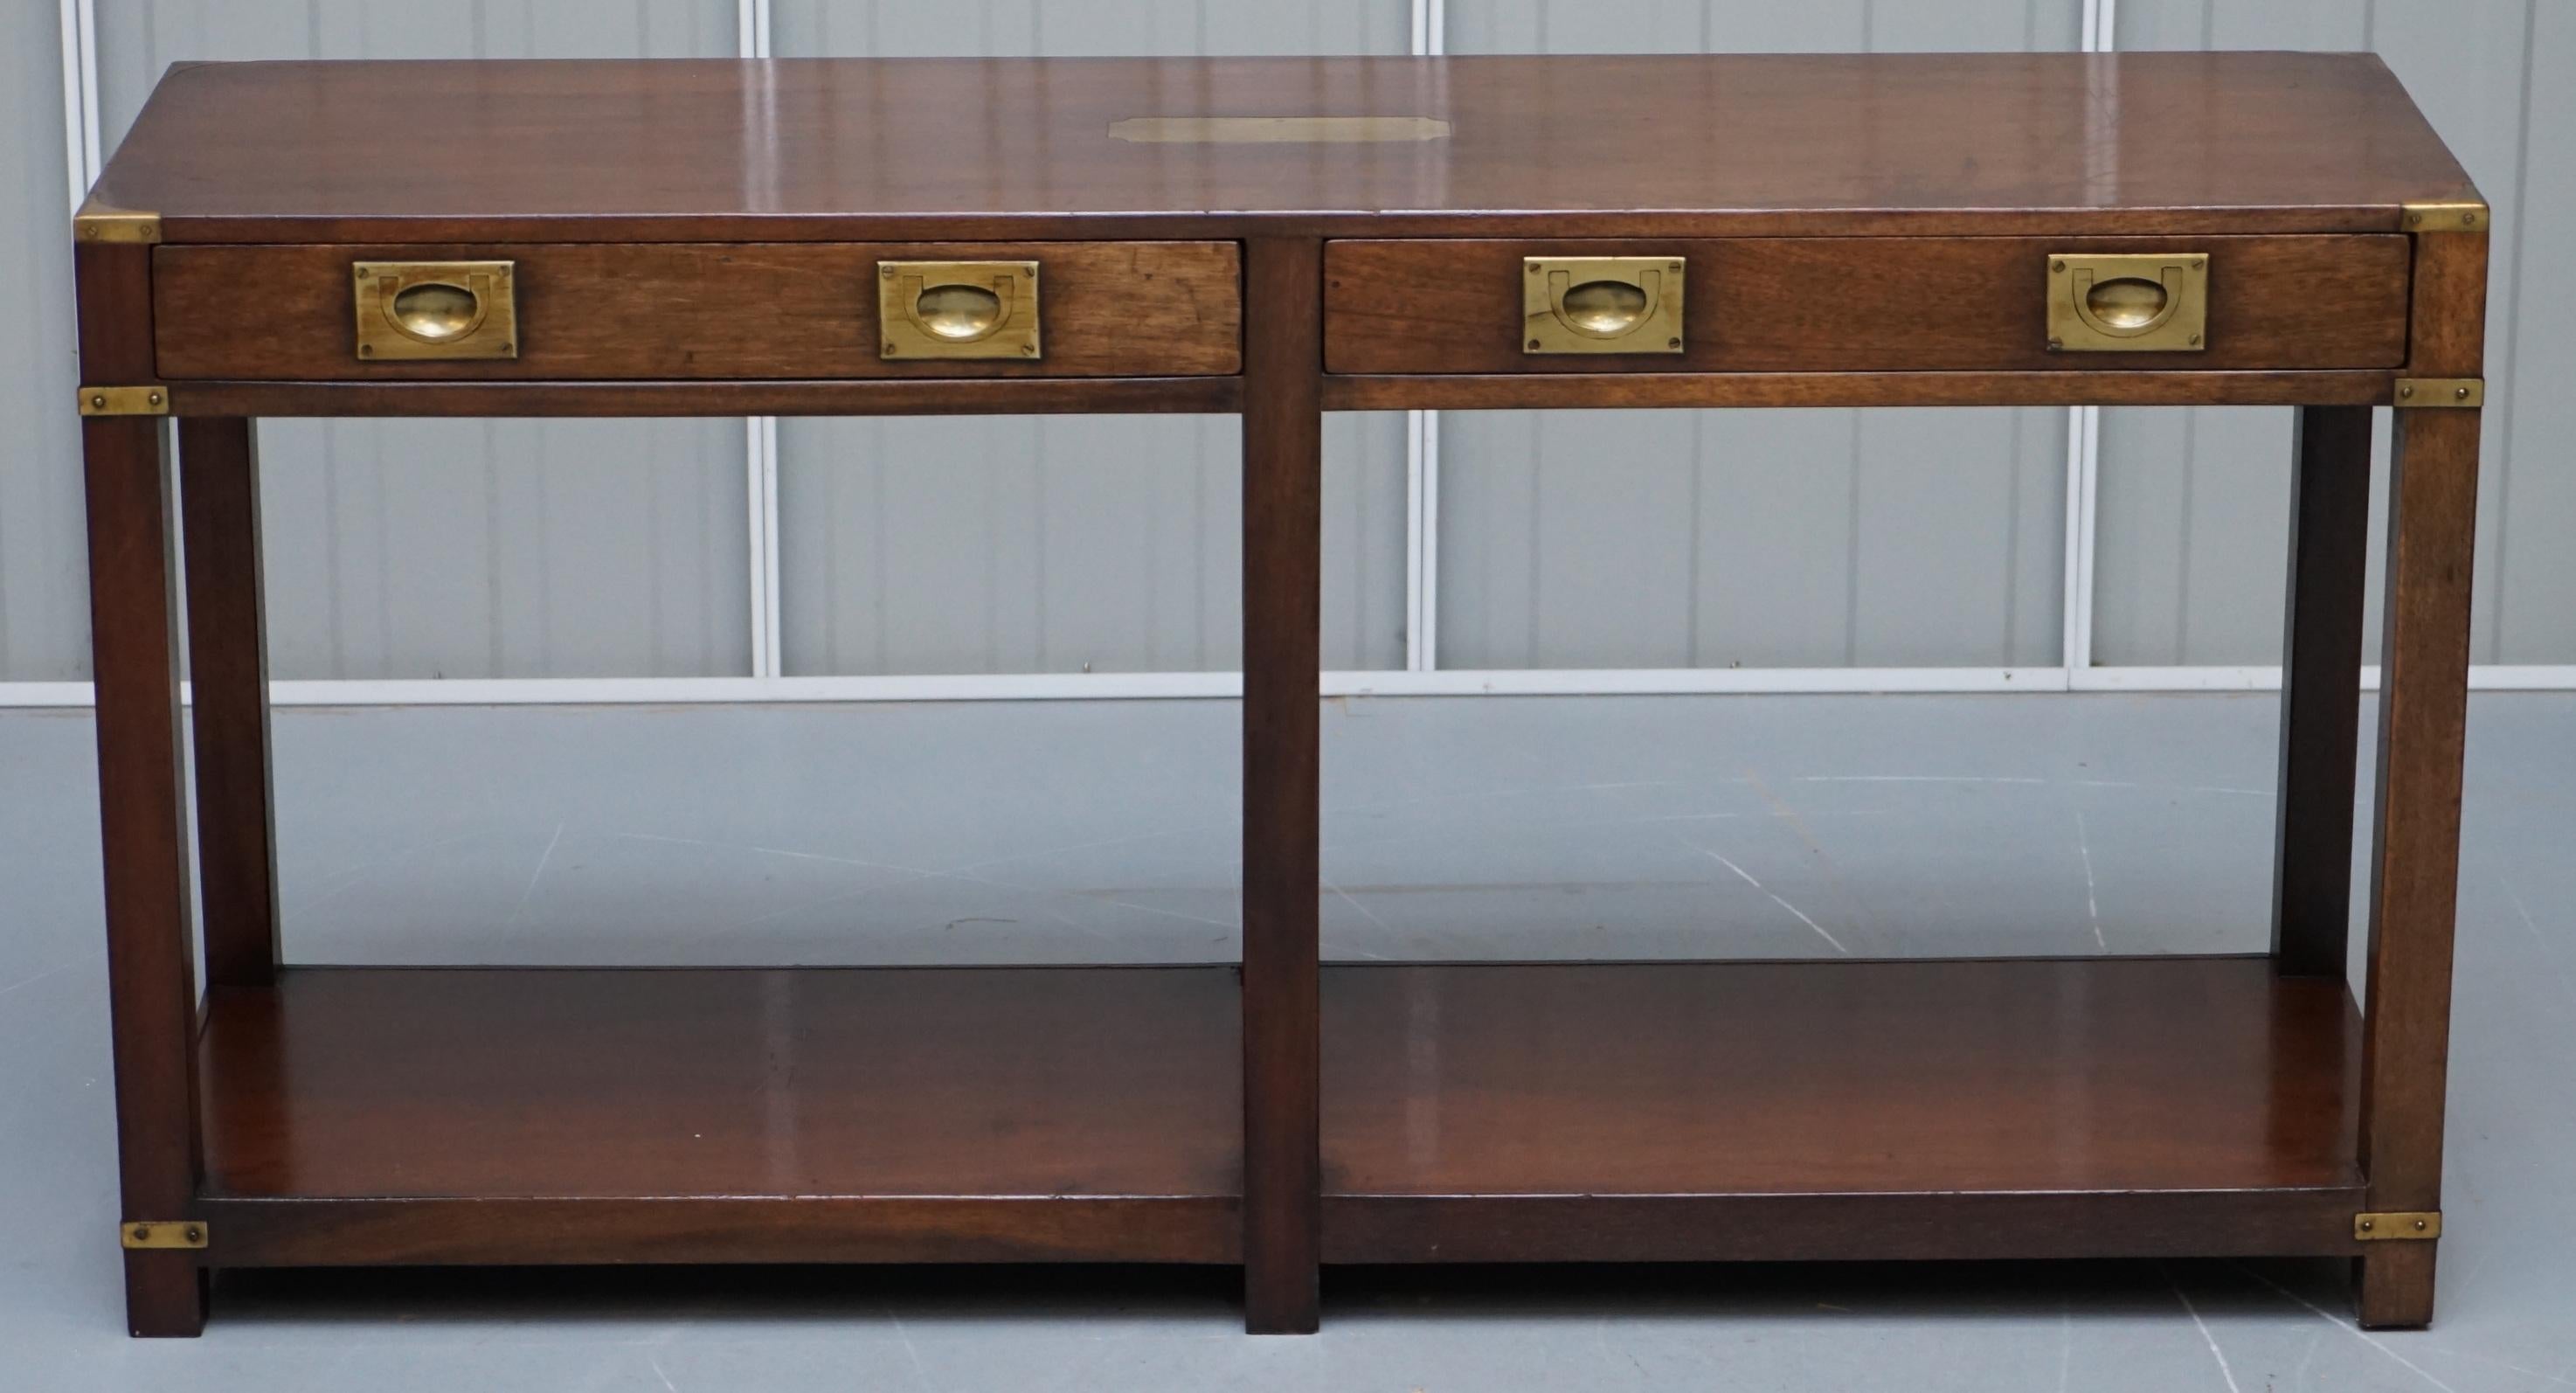 We are delighted to offer for sale this lovely Military Campaign Harrods Kennedy style console table with drawers

A good looking and well made table, in solid hardwood with brass hard wear

The table has been cleaned waxed and polished, there